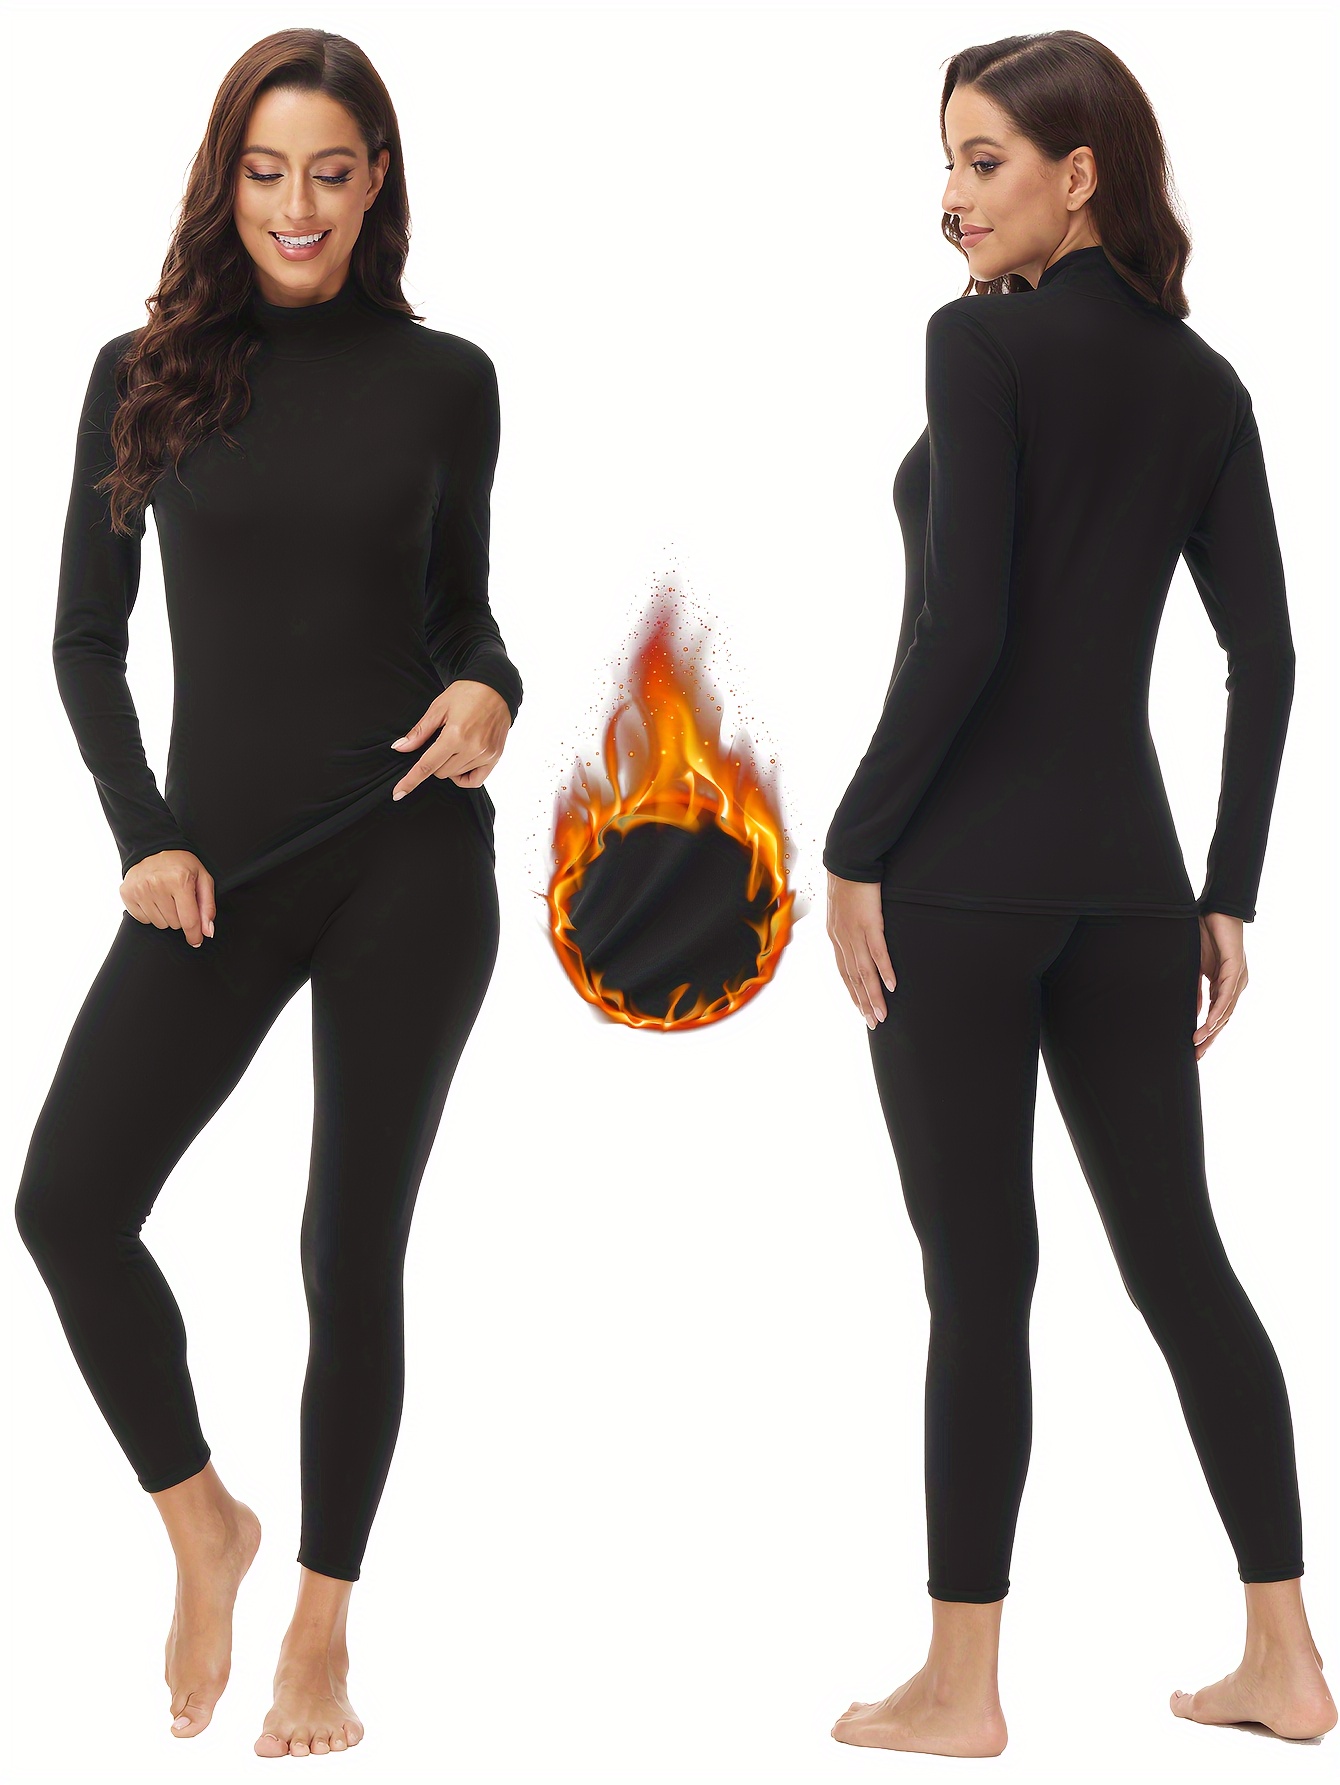 Aueoeo Thermal Wear for Women, Thermal Underwear for Women Extreme